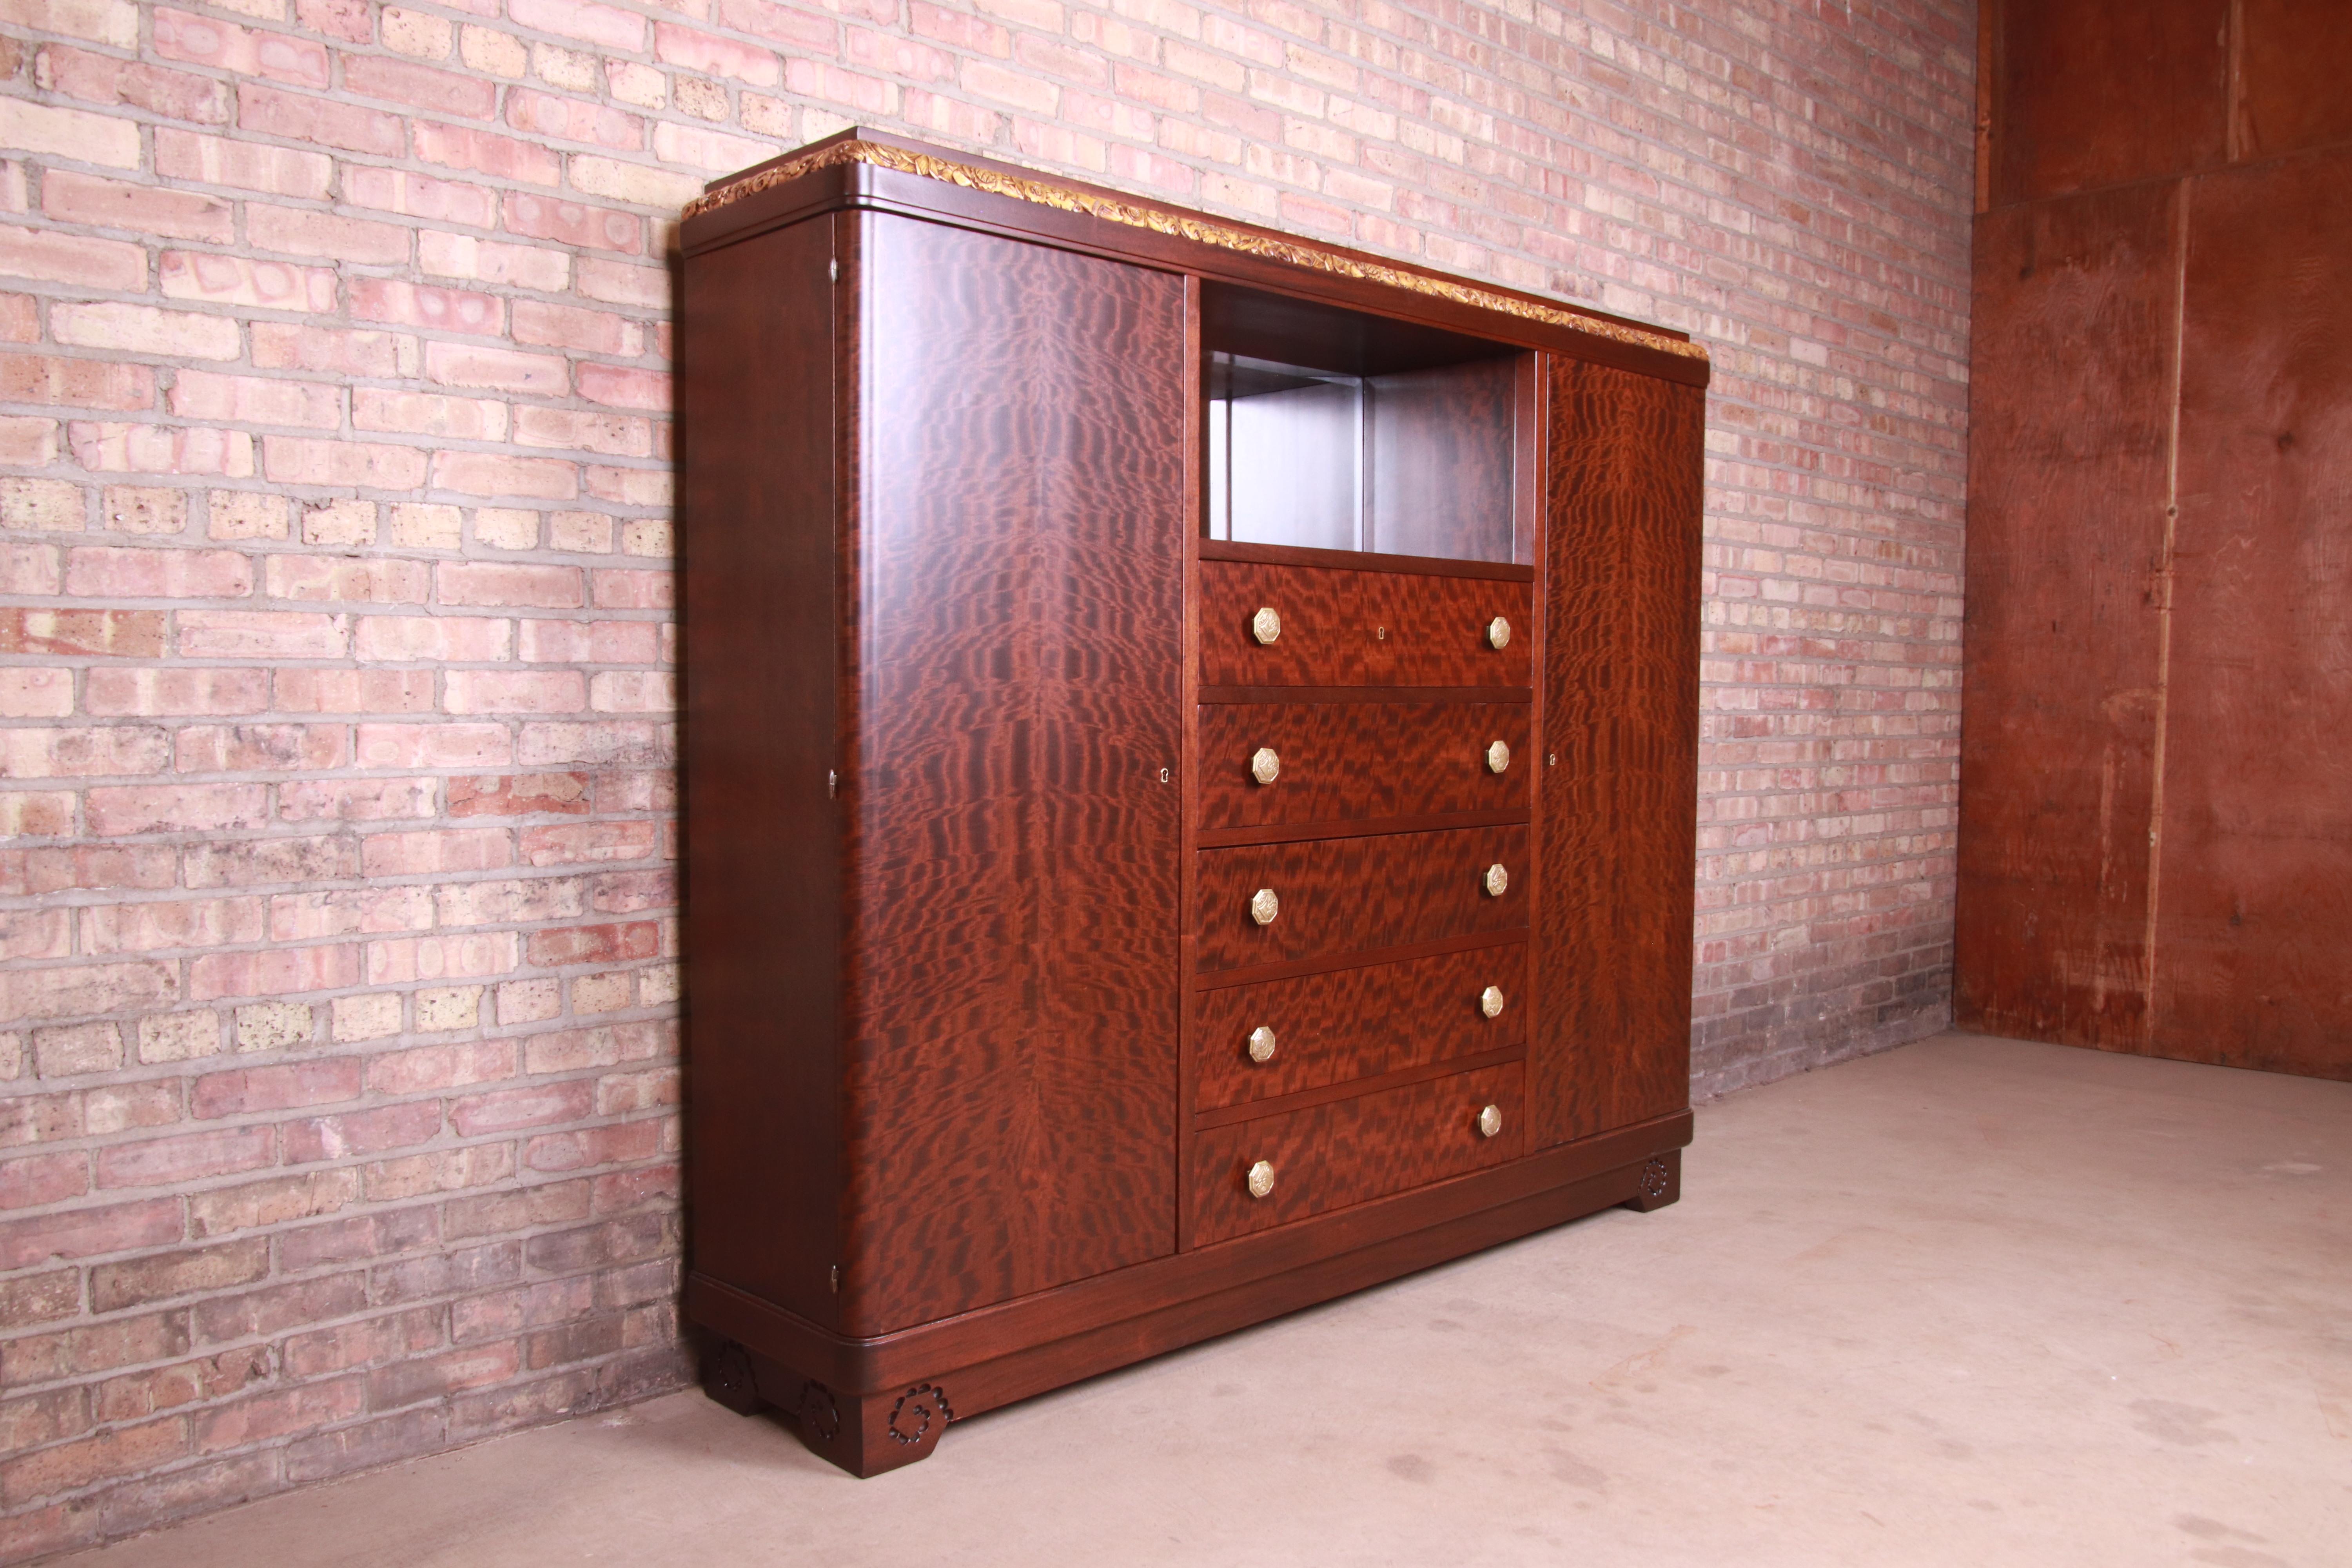 20th Century Louis Majorelle Signed Art Nouveau Burled Mahogany Bar Cabinet, Newly Restored For Sale